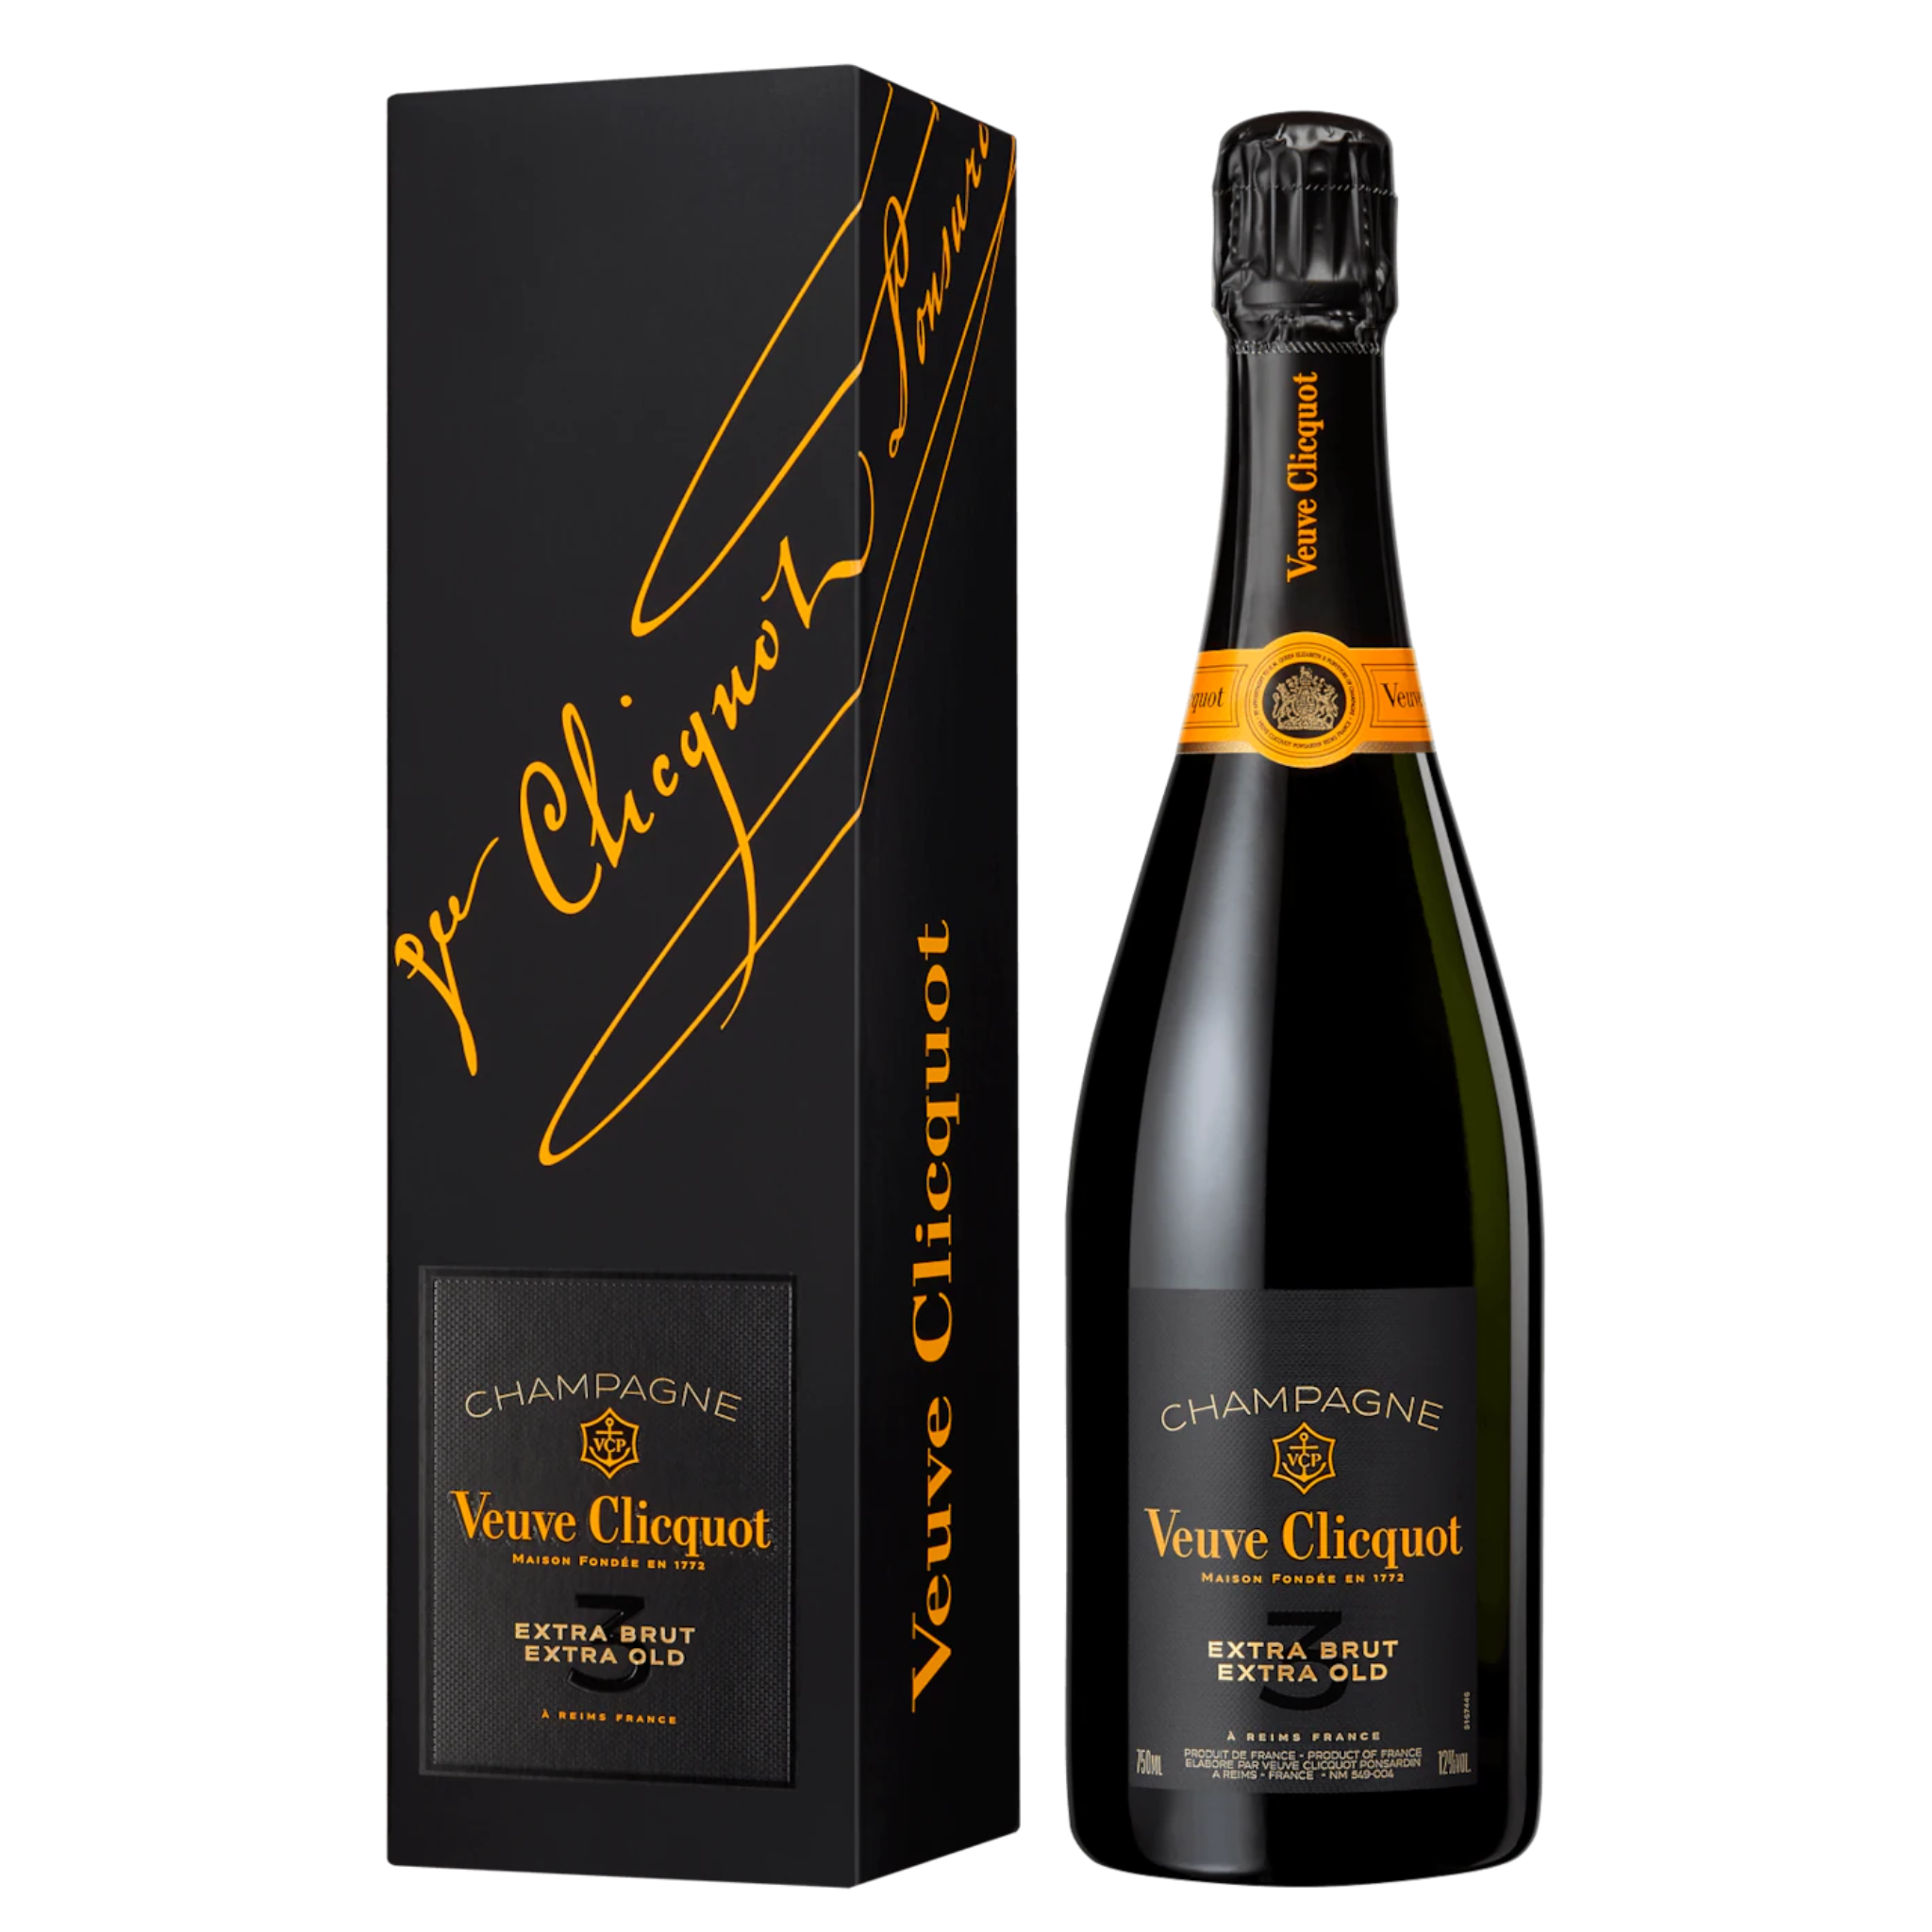 Veuve Clicquot Brut Extra Old Champagne - 750ml / 1